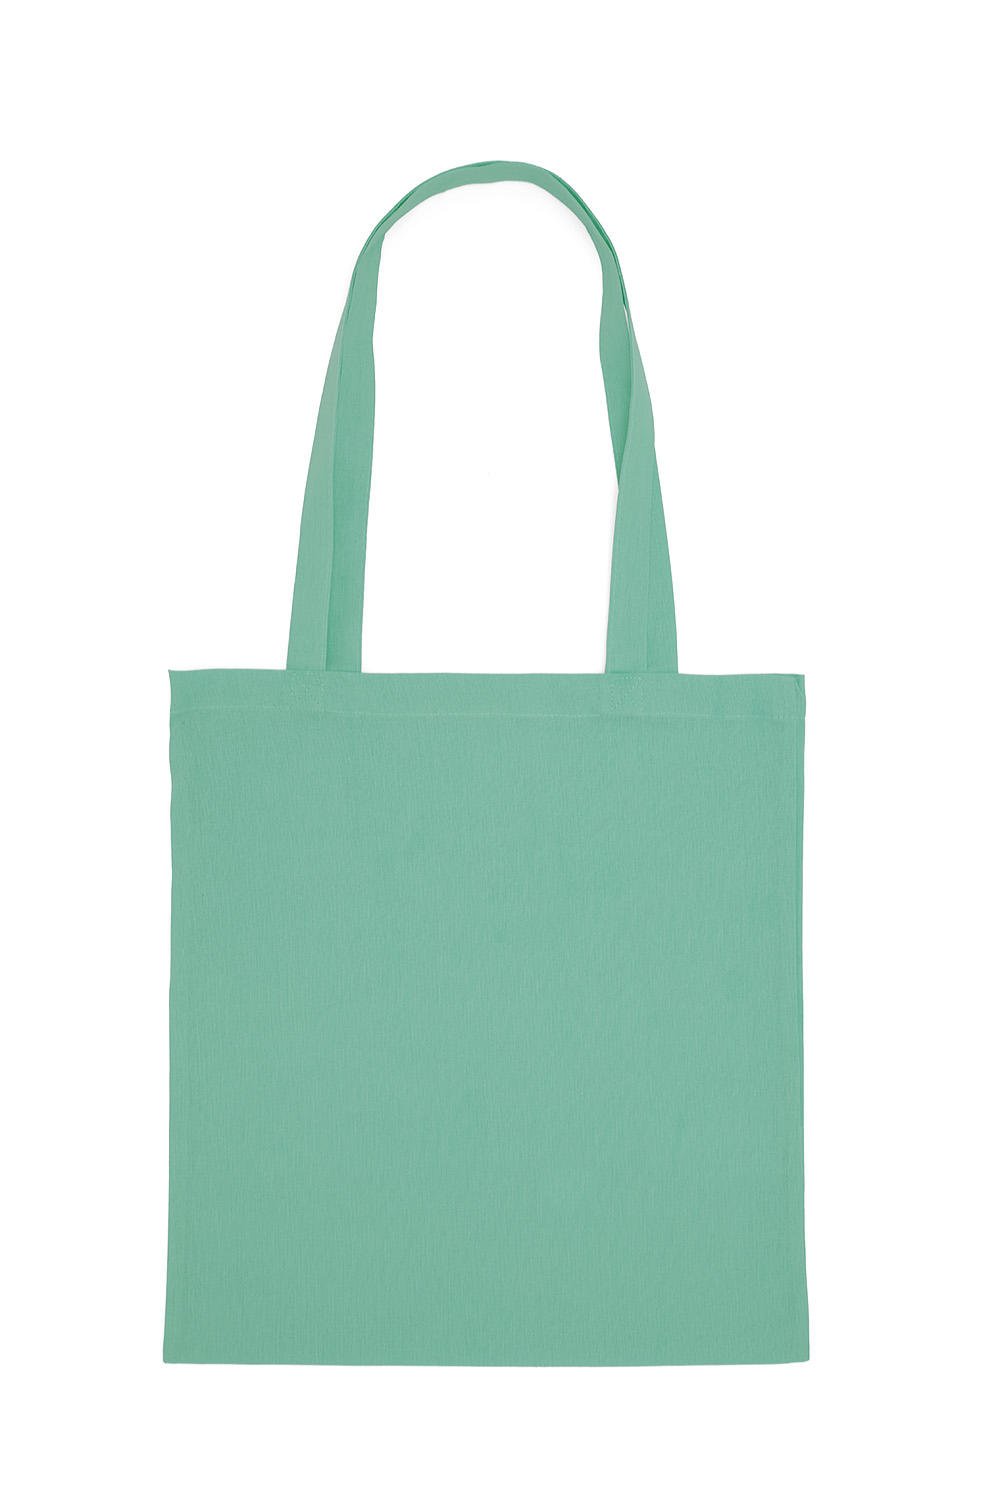  Cotton Bag LH in Farbe Neo Mint